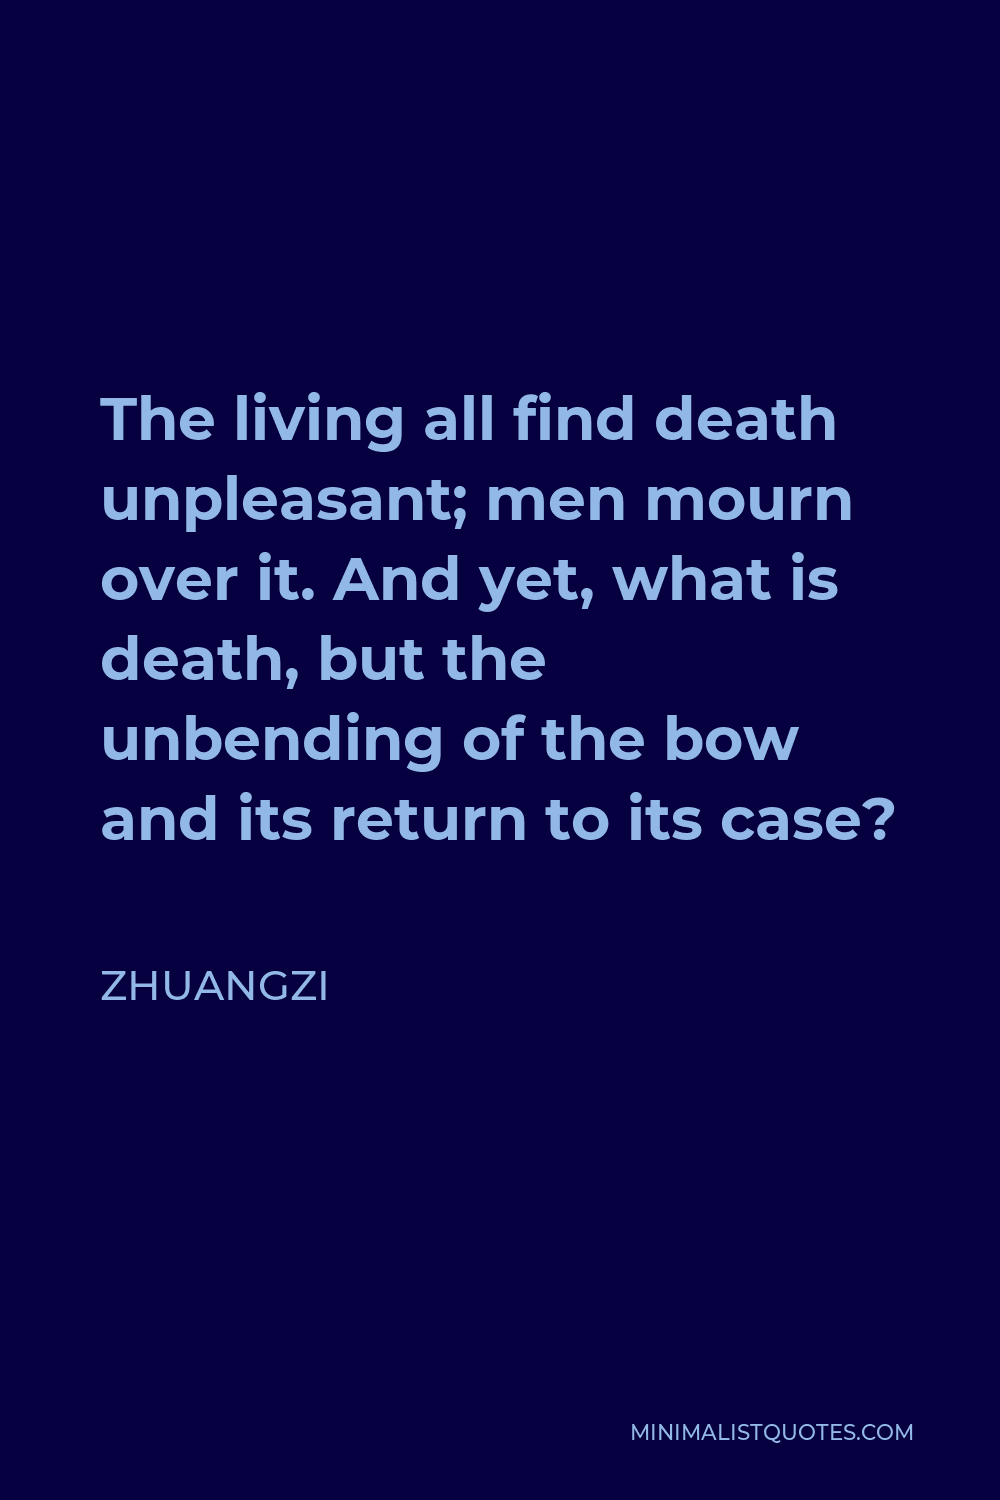 Zhuangzi Quote - The living all find death unpleasant; men mourn over it. And yet, what is death, but the unbending of the bow and its return to its case?